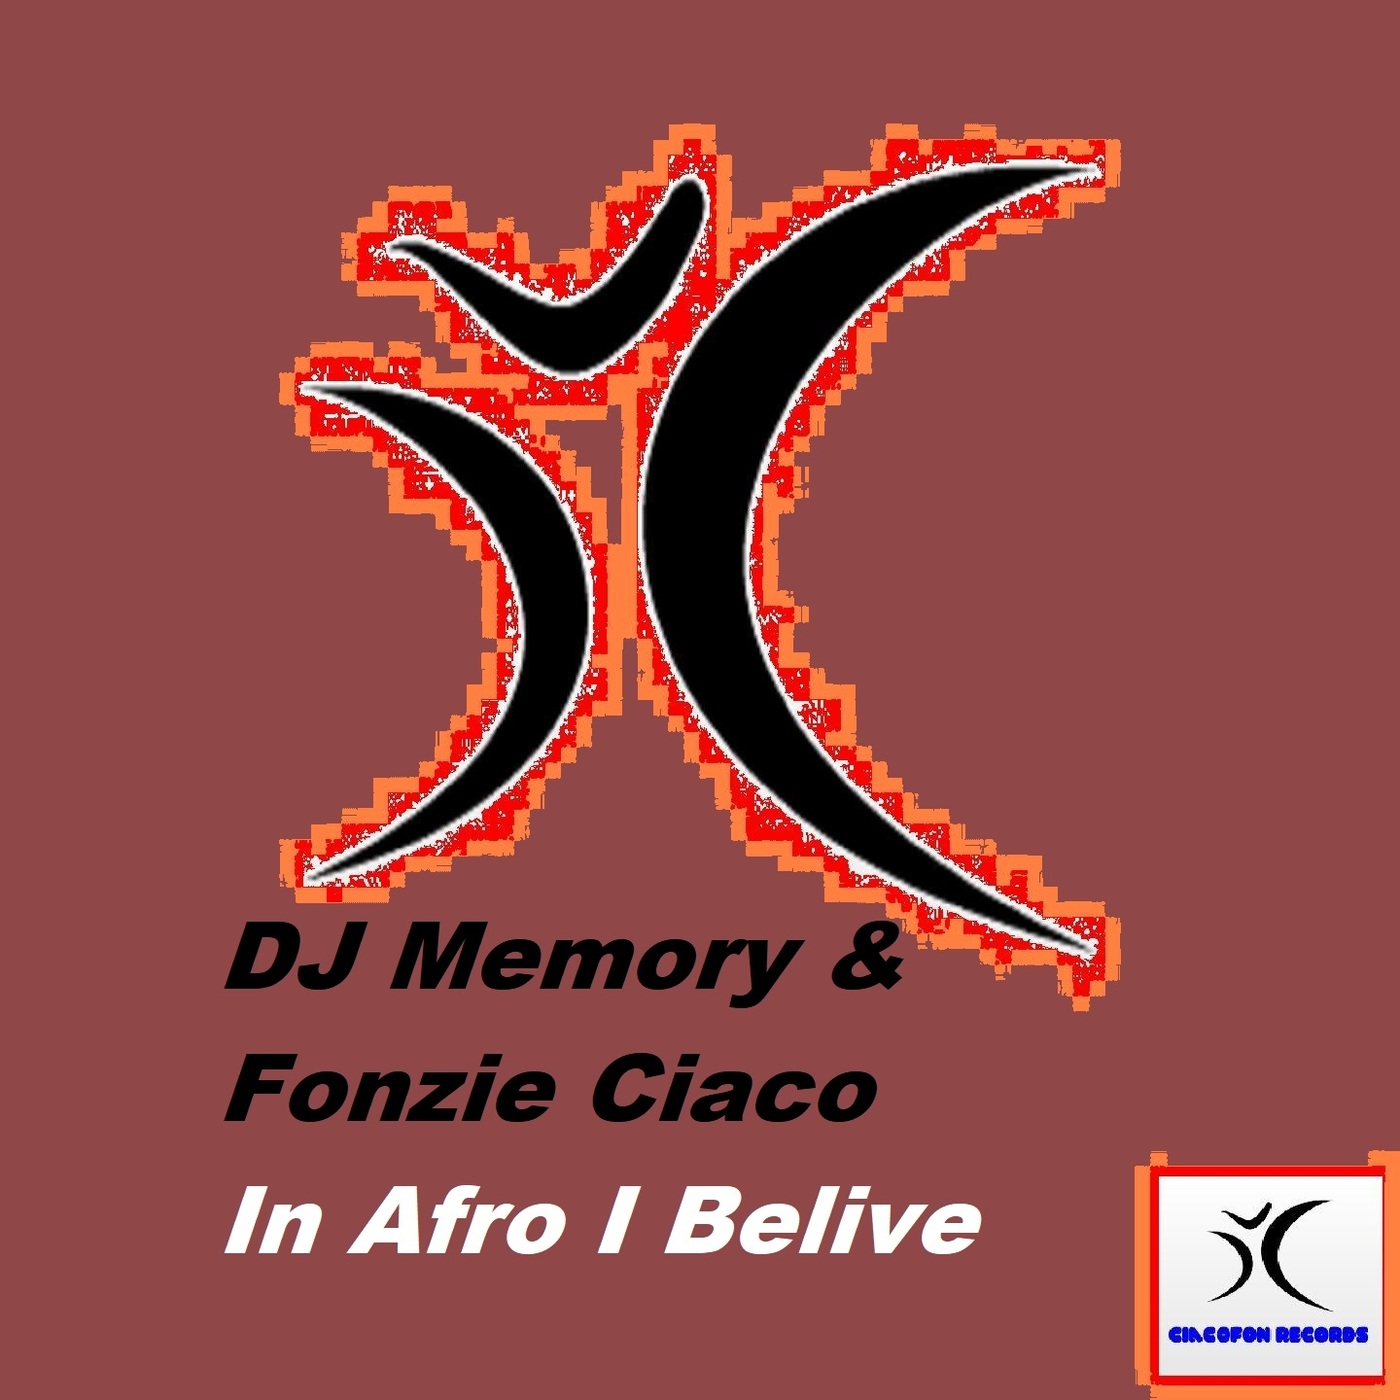 Fonzie Ciaco - In Afro I Belive / Ciacofon Records